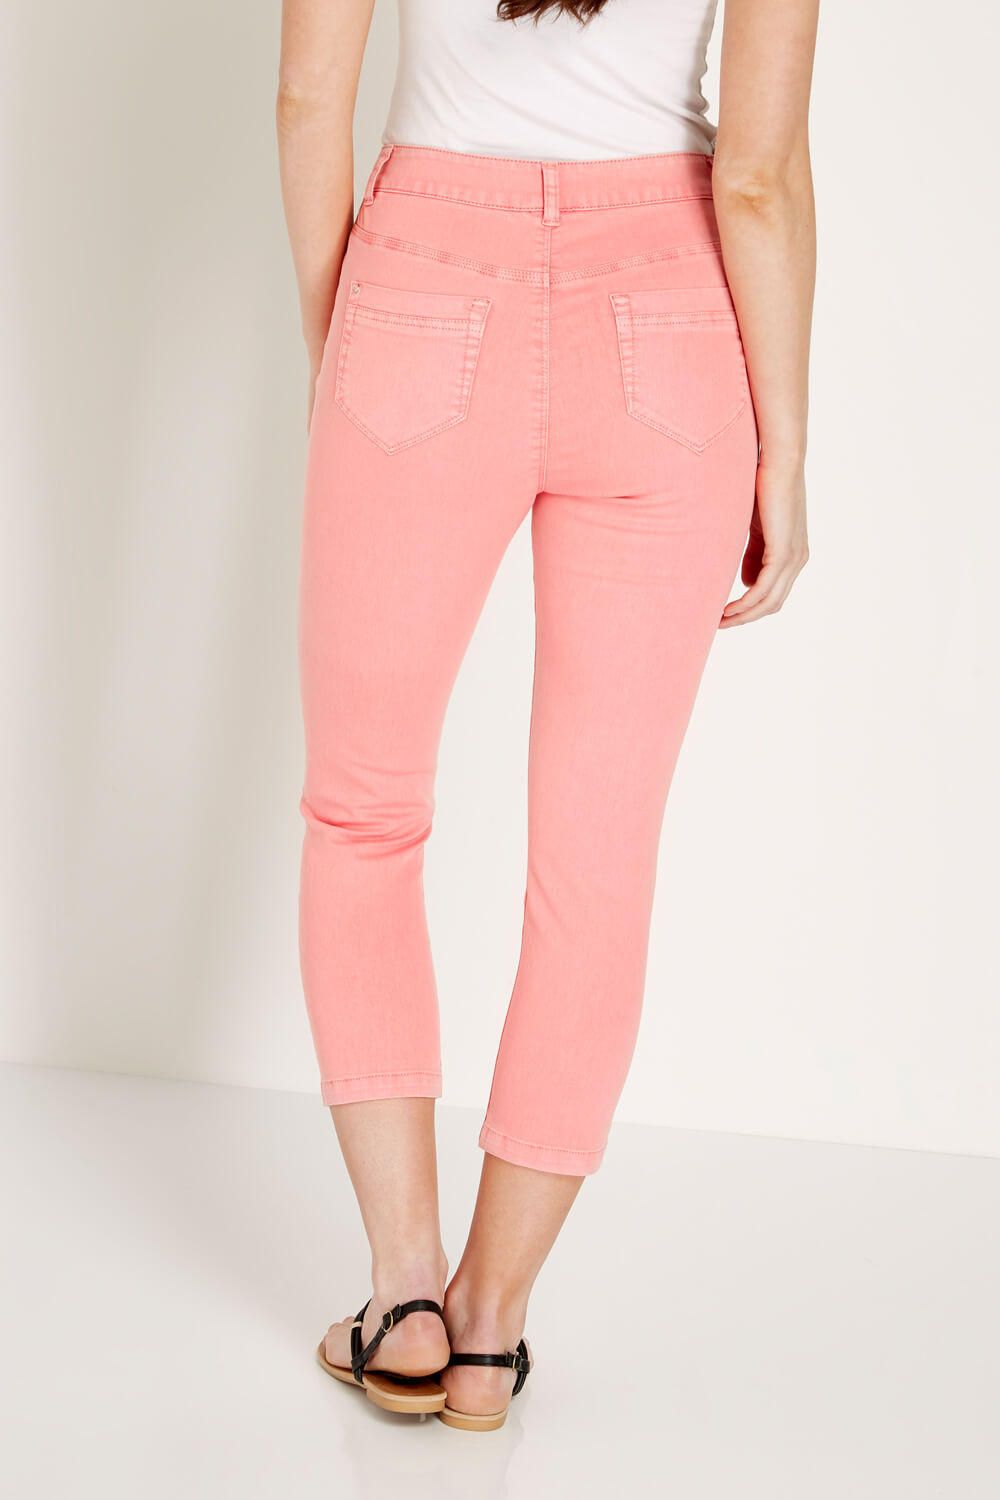 PINK Cropped Jean, Image 2 of 4